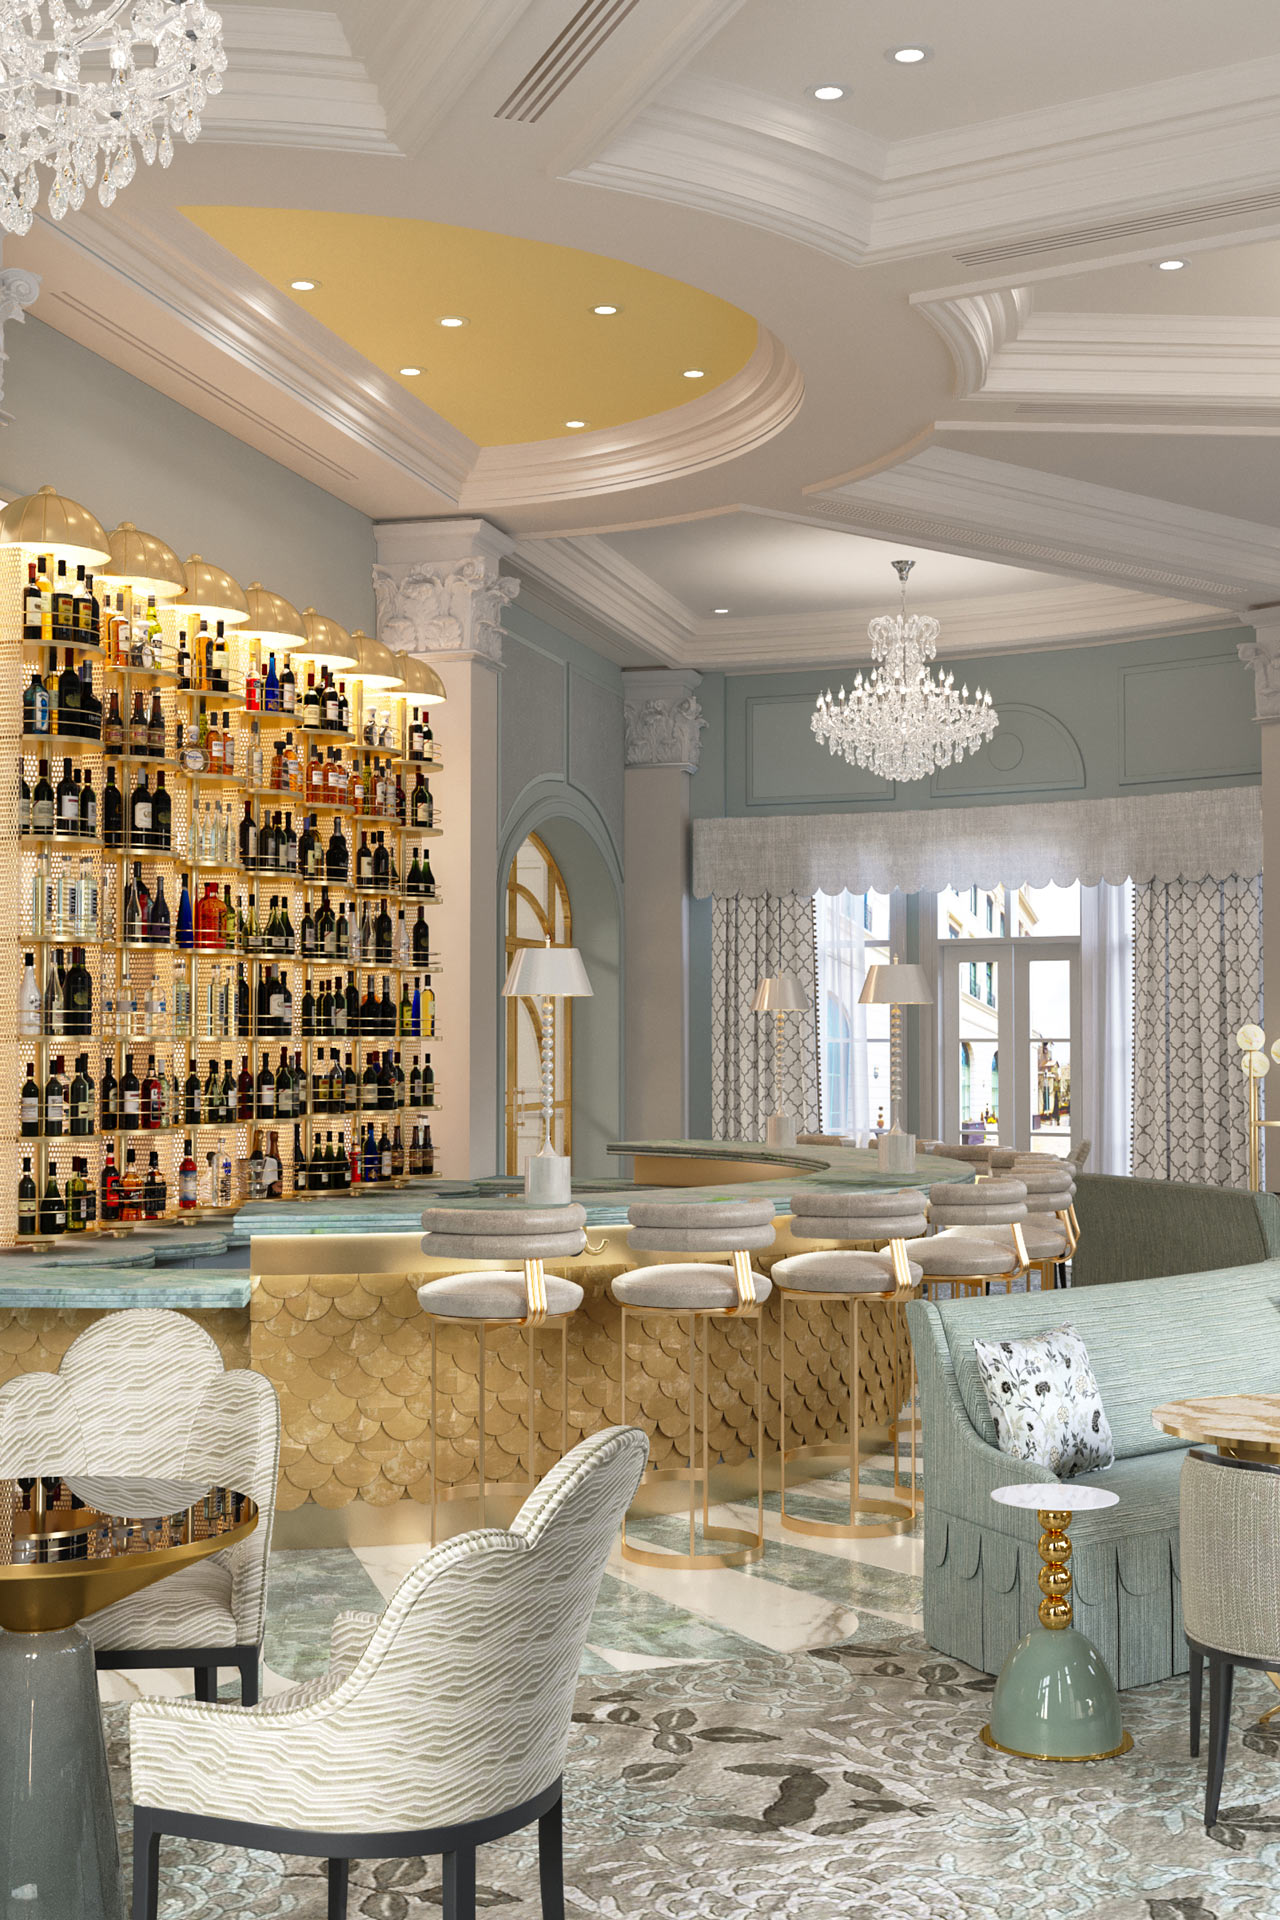 Click here to open the gallery overlay for the image: beautiful view of a bar with tables and chandelier as part of a gallery decorative page